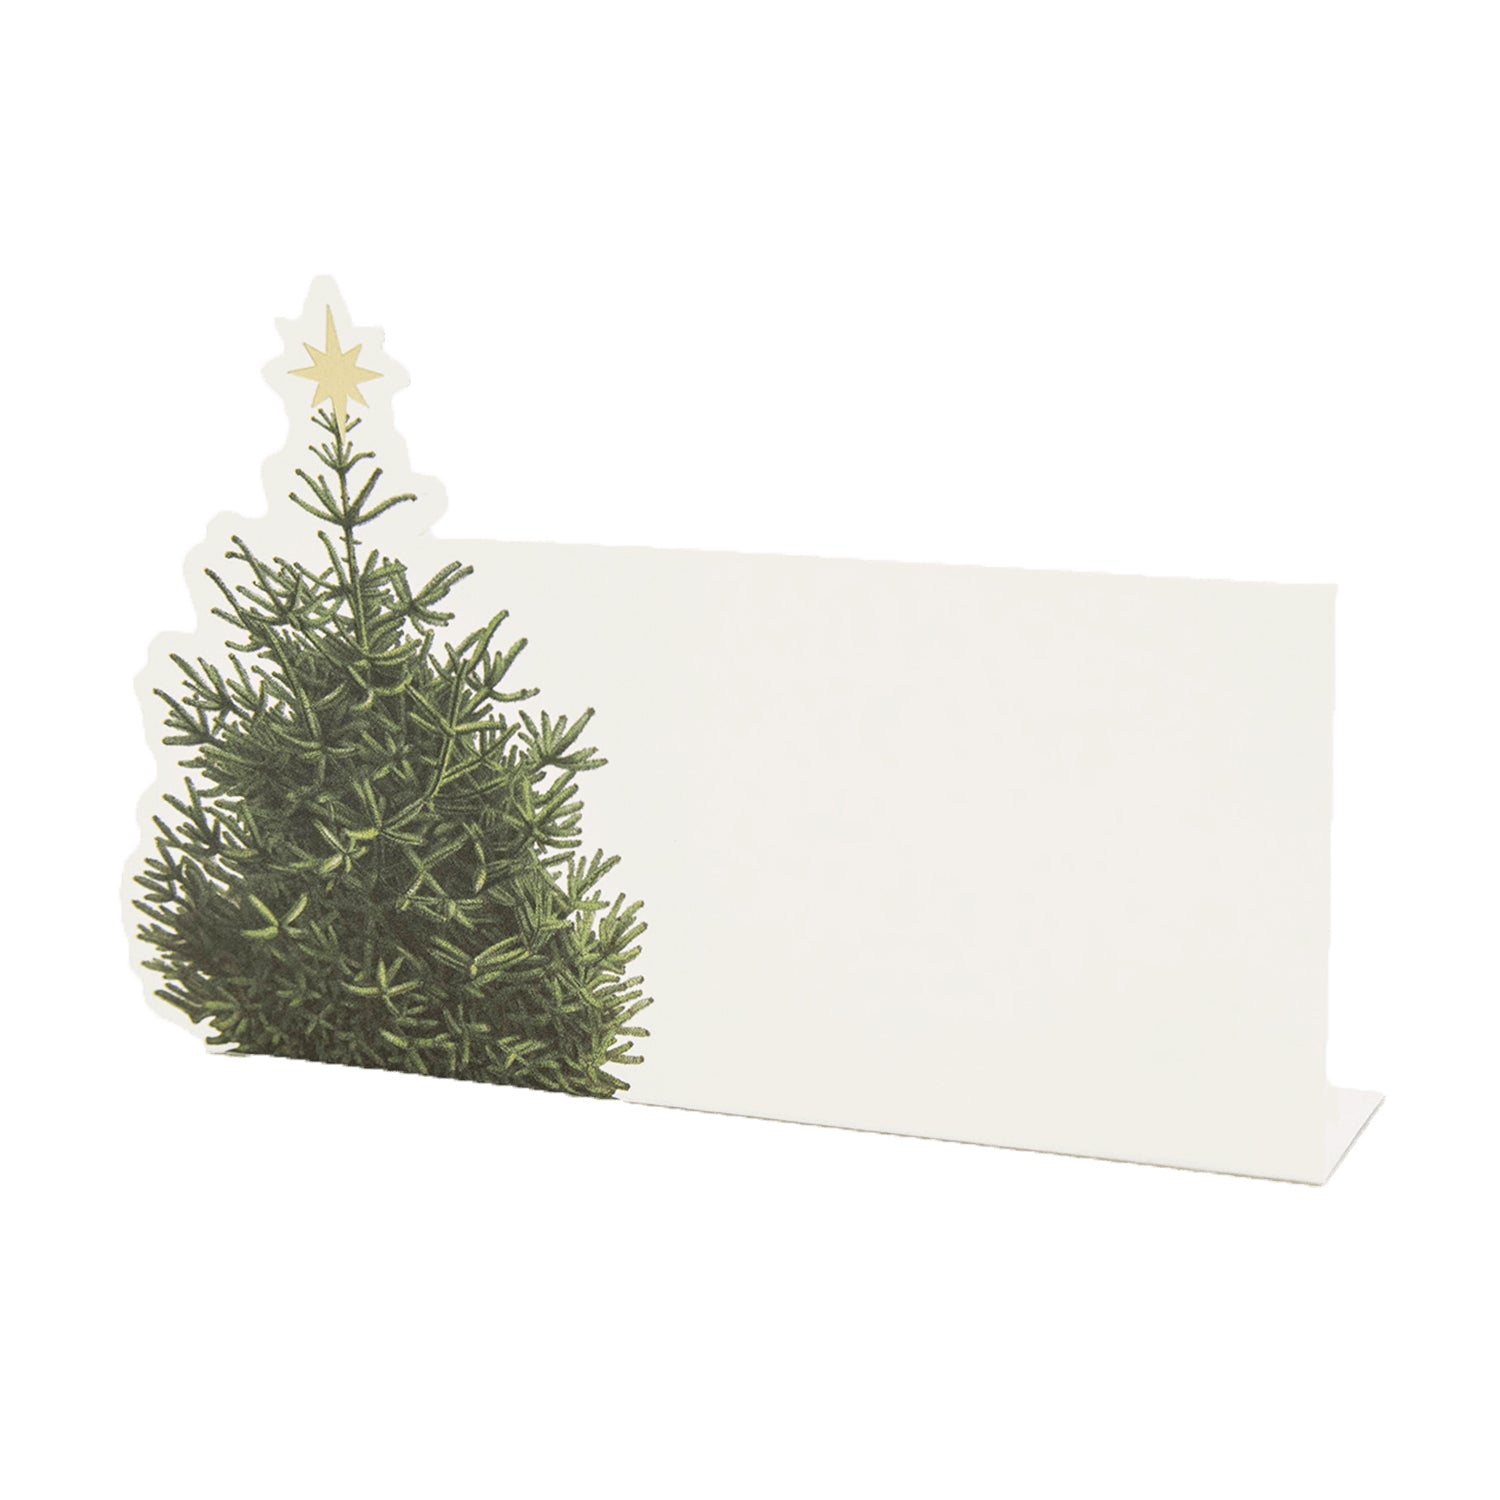 A white, rectangular, freestanding place card featuring an illustrated evergreen tree with a gold foil star on top, adorning the left edge of the card.